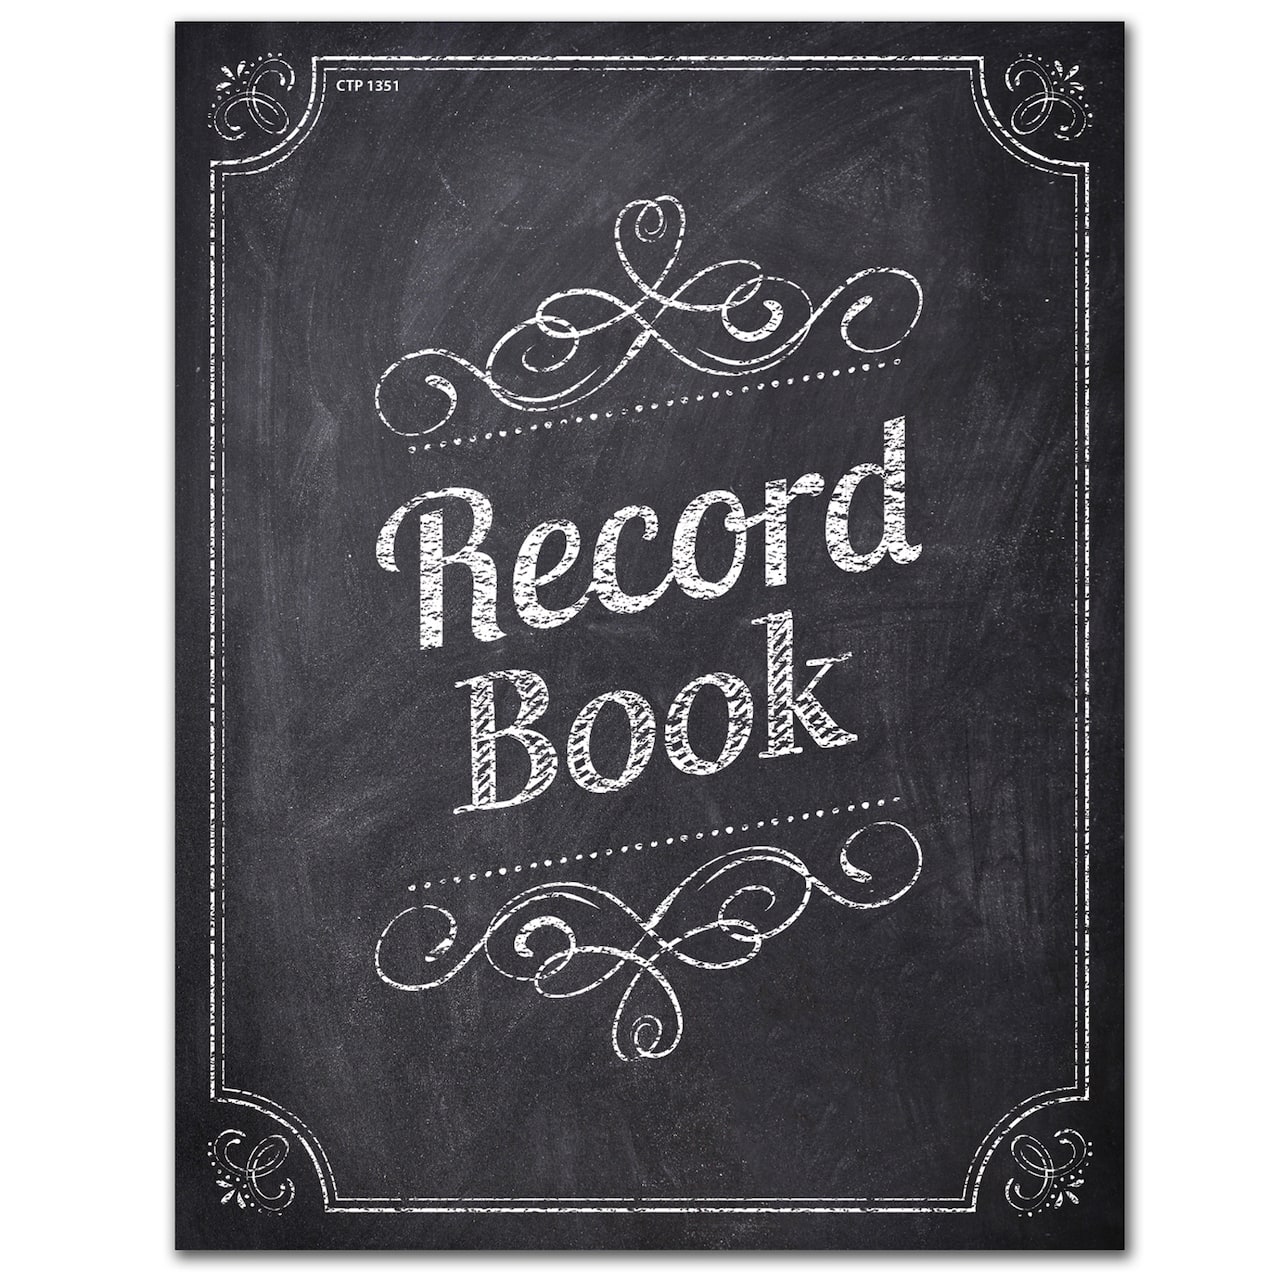 Chalk It Up! Record Book, Pack of 3